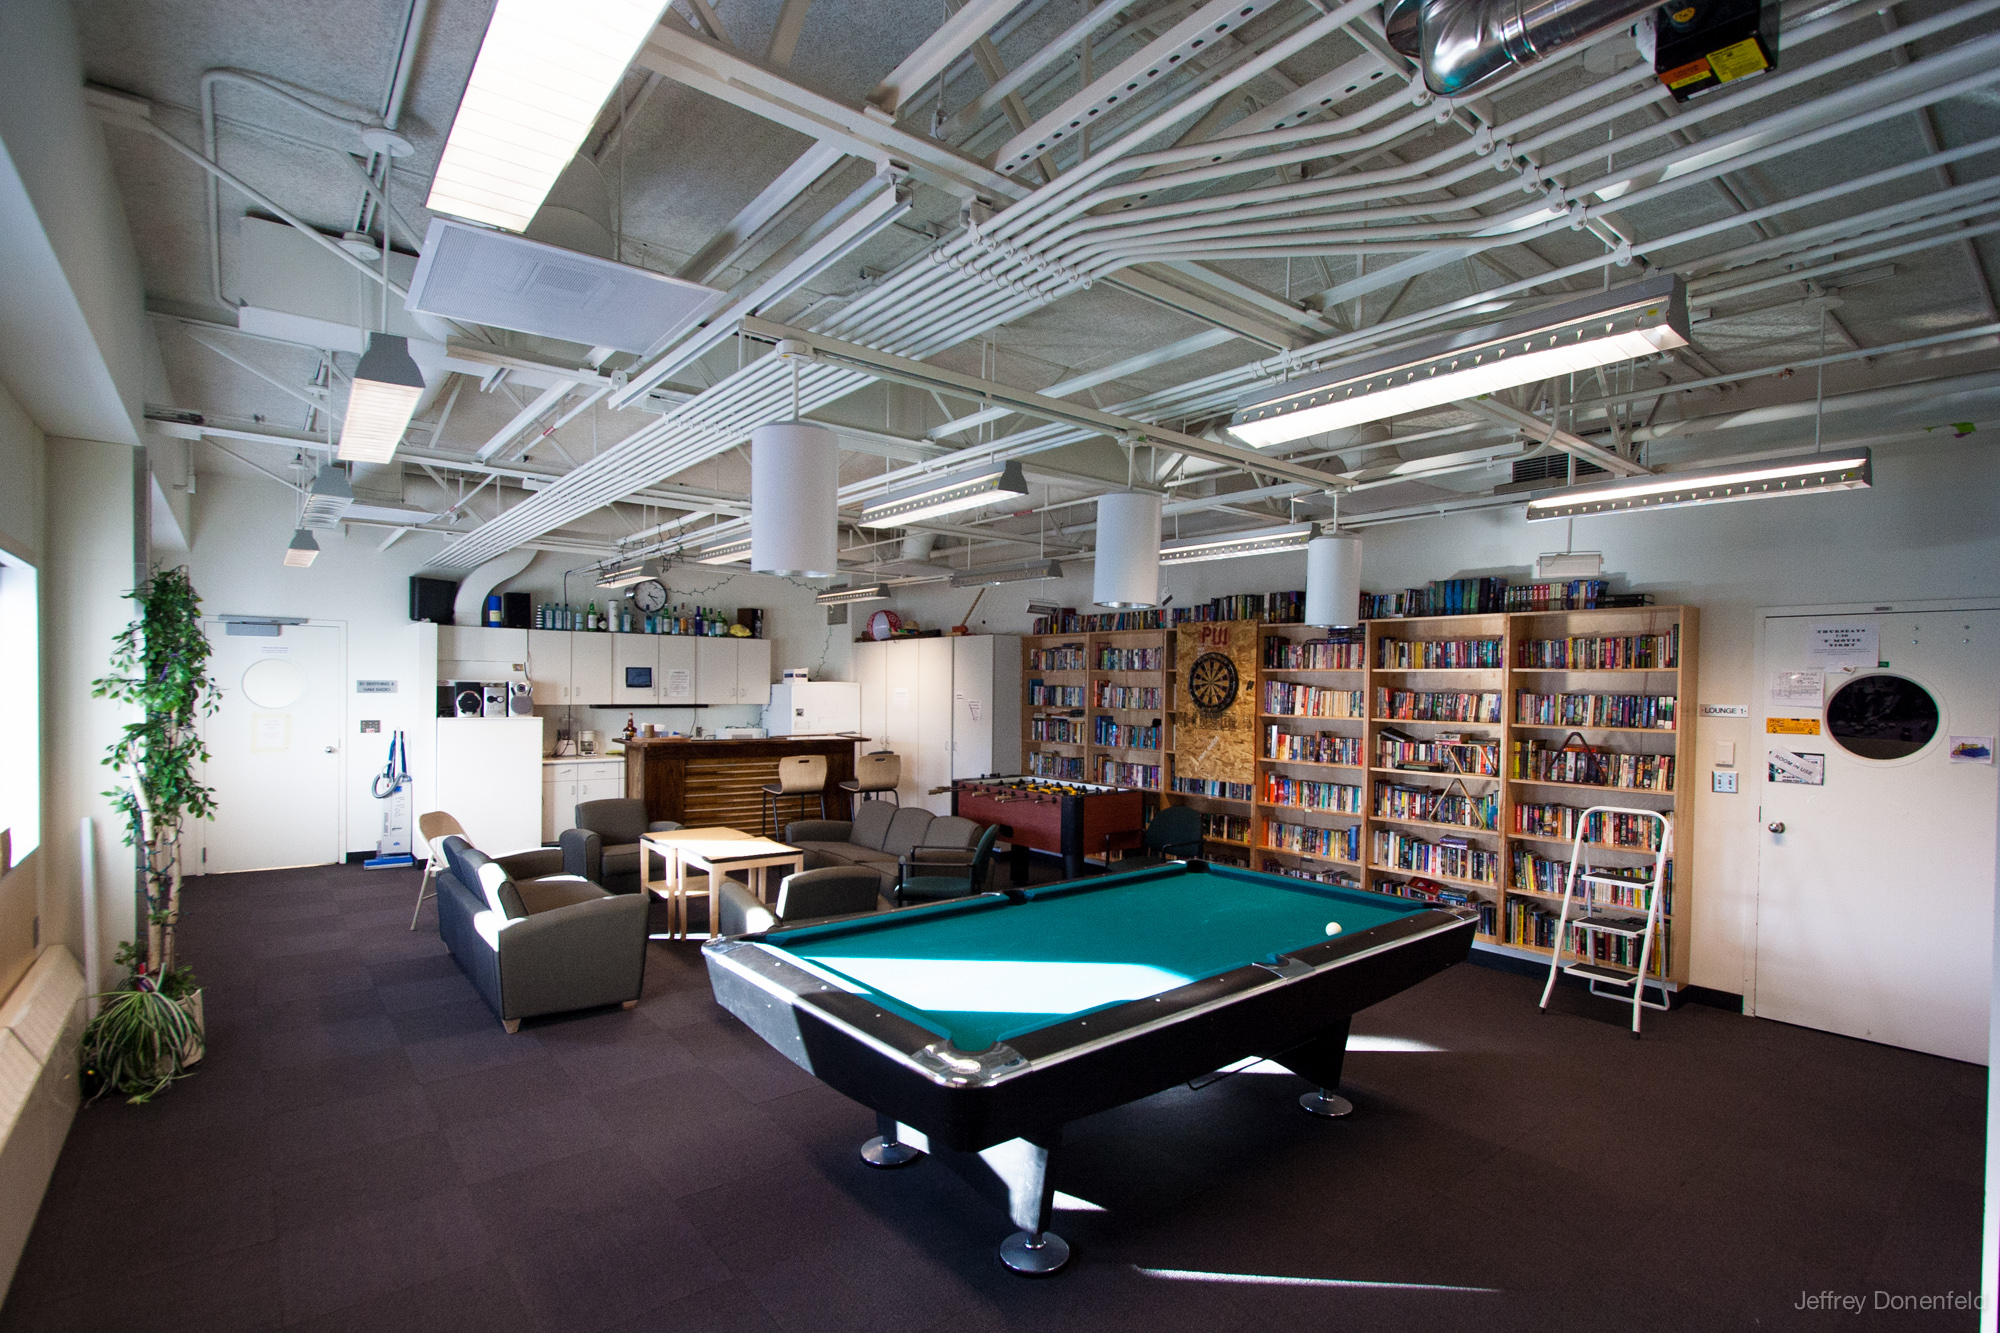 The B1 Lounge – Billiards and Foosball at the South Pole